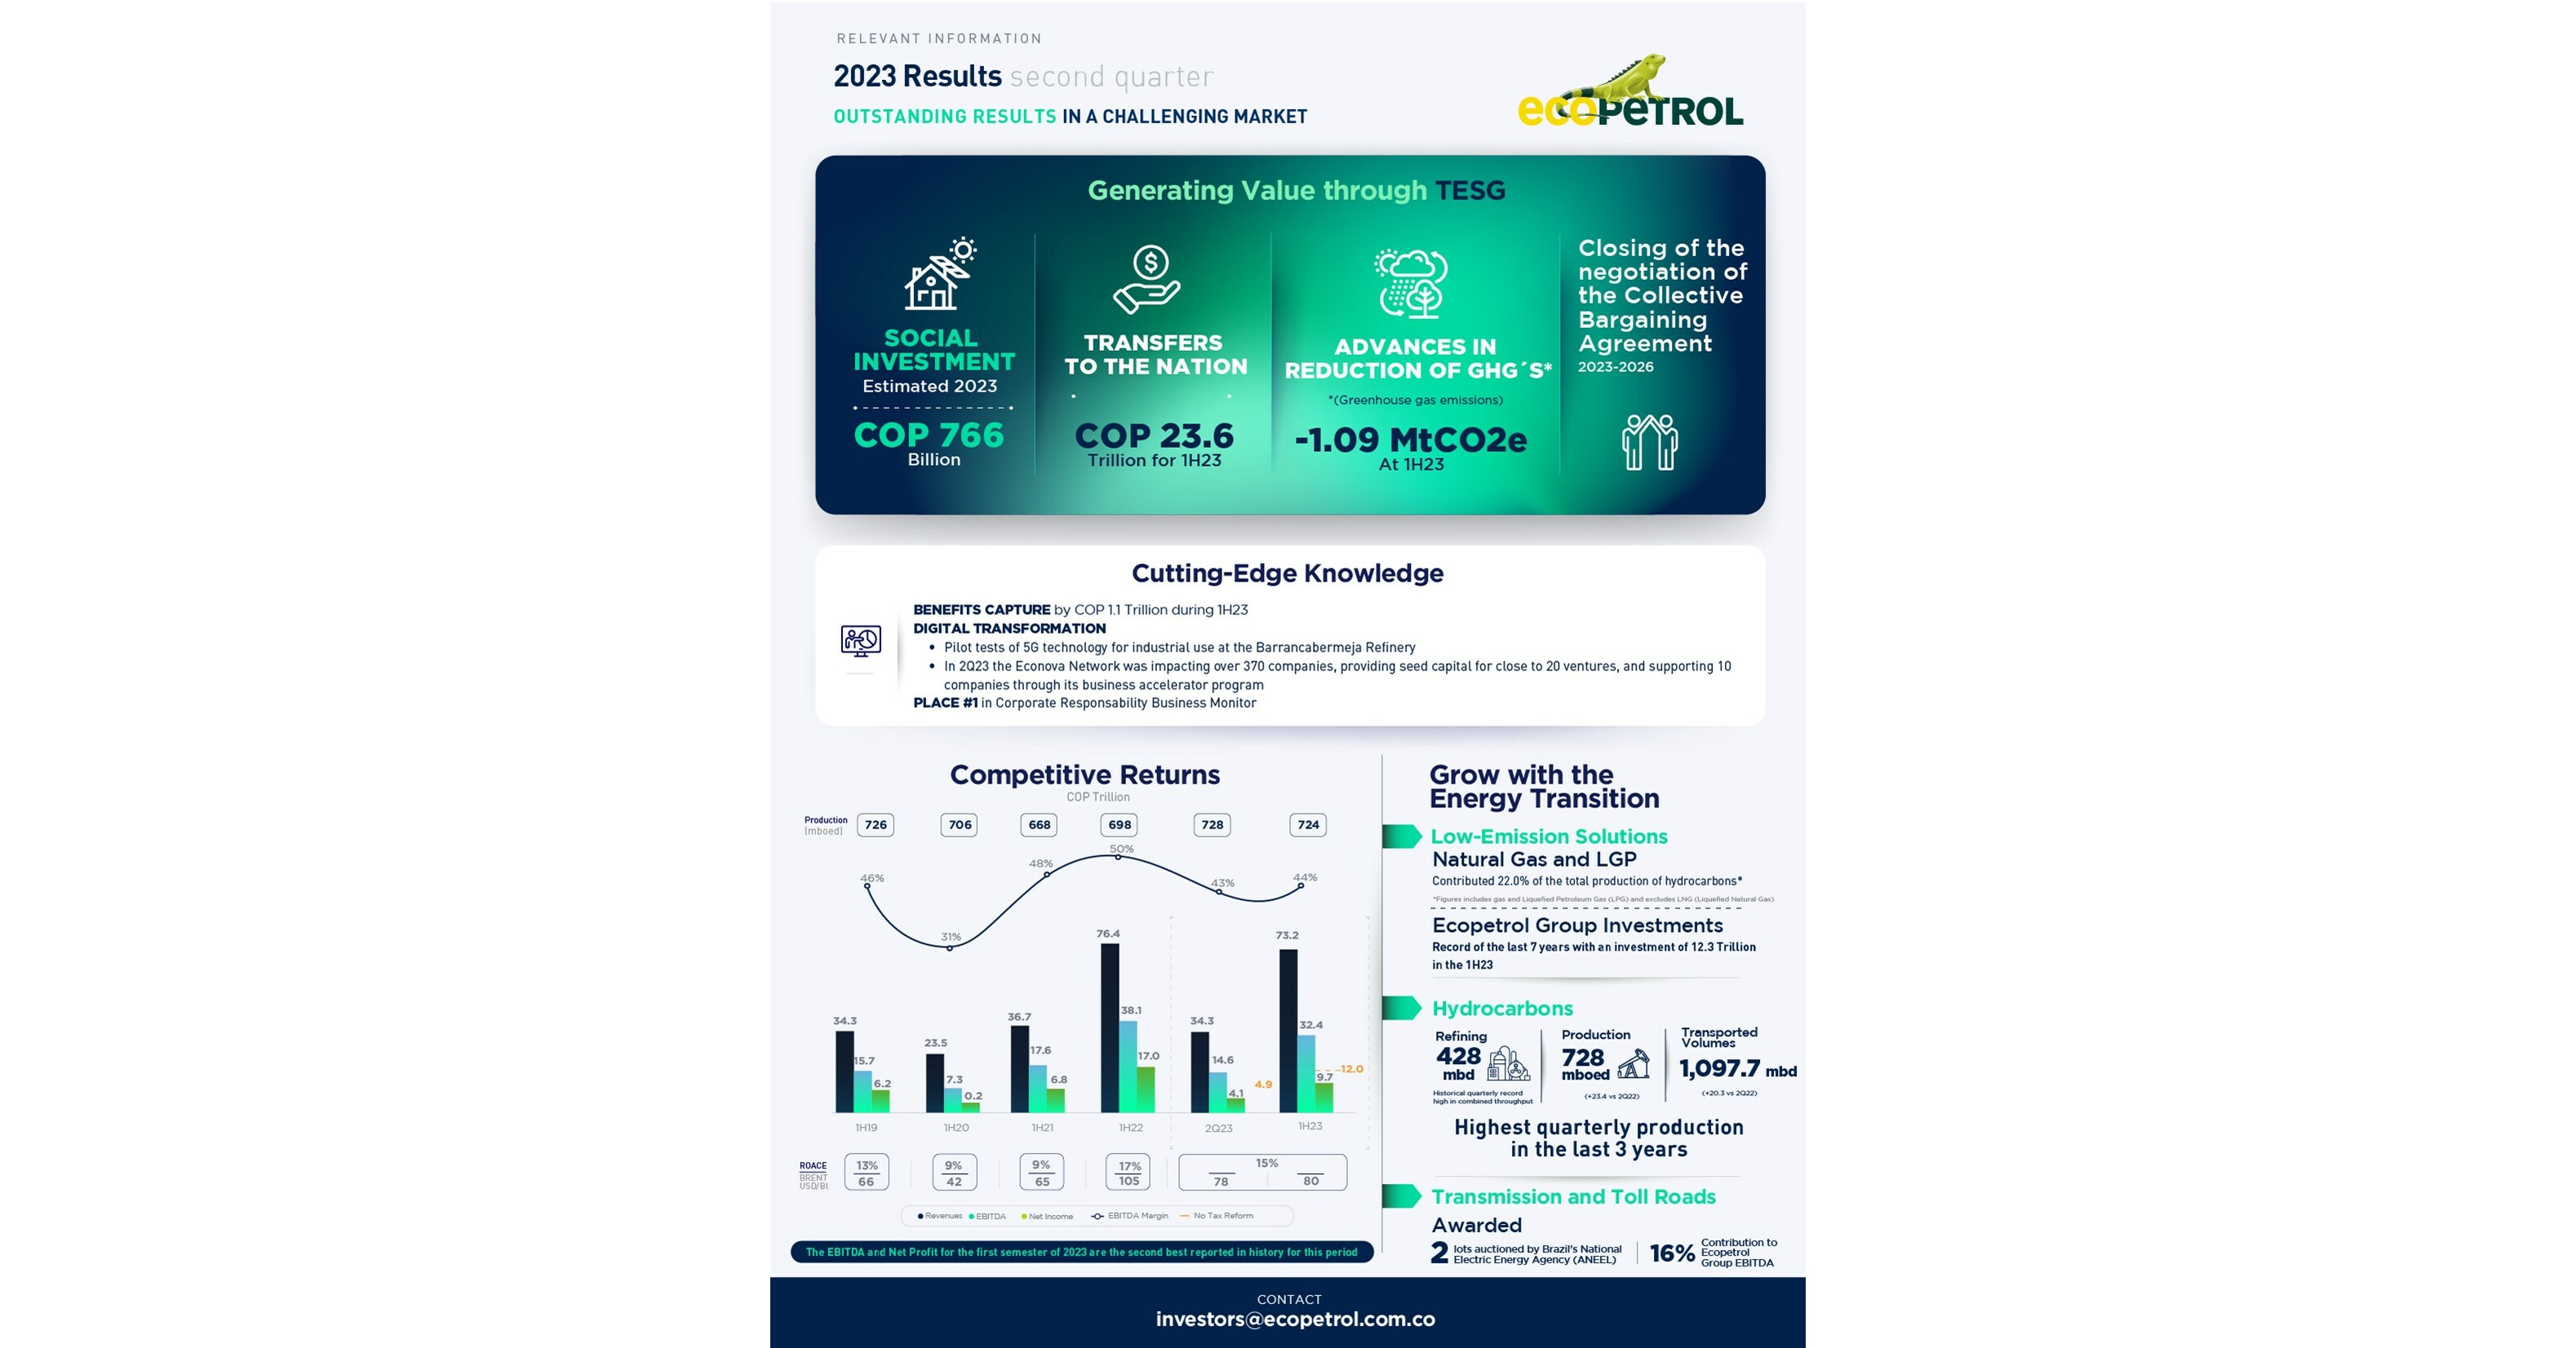 Ecopetrol Group's financial results for the second quarter and